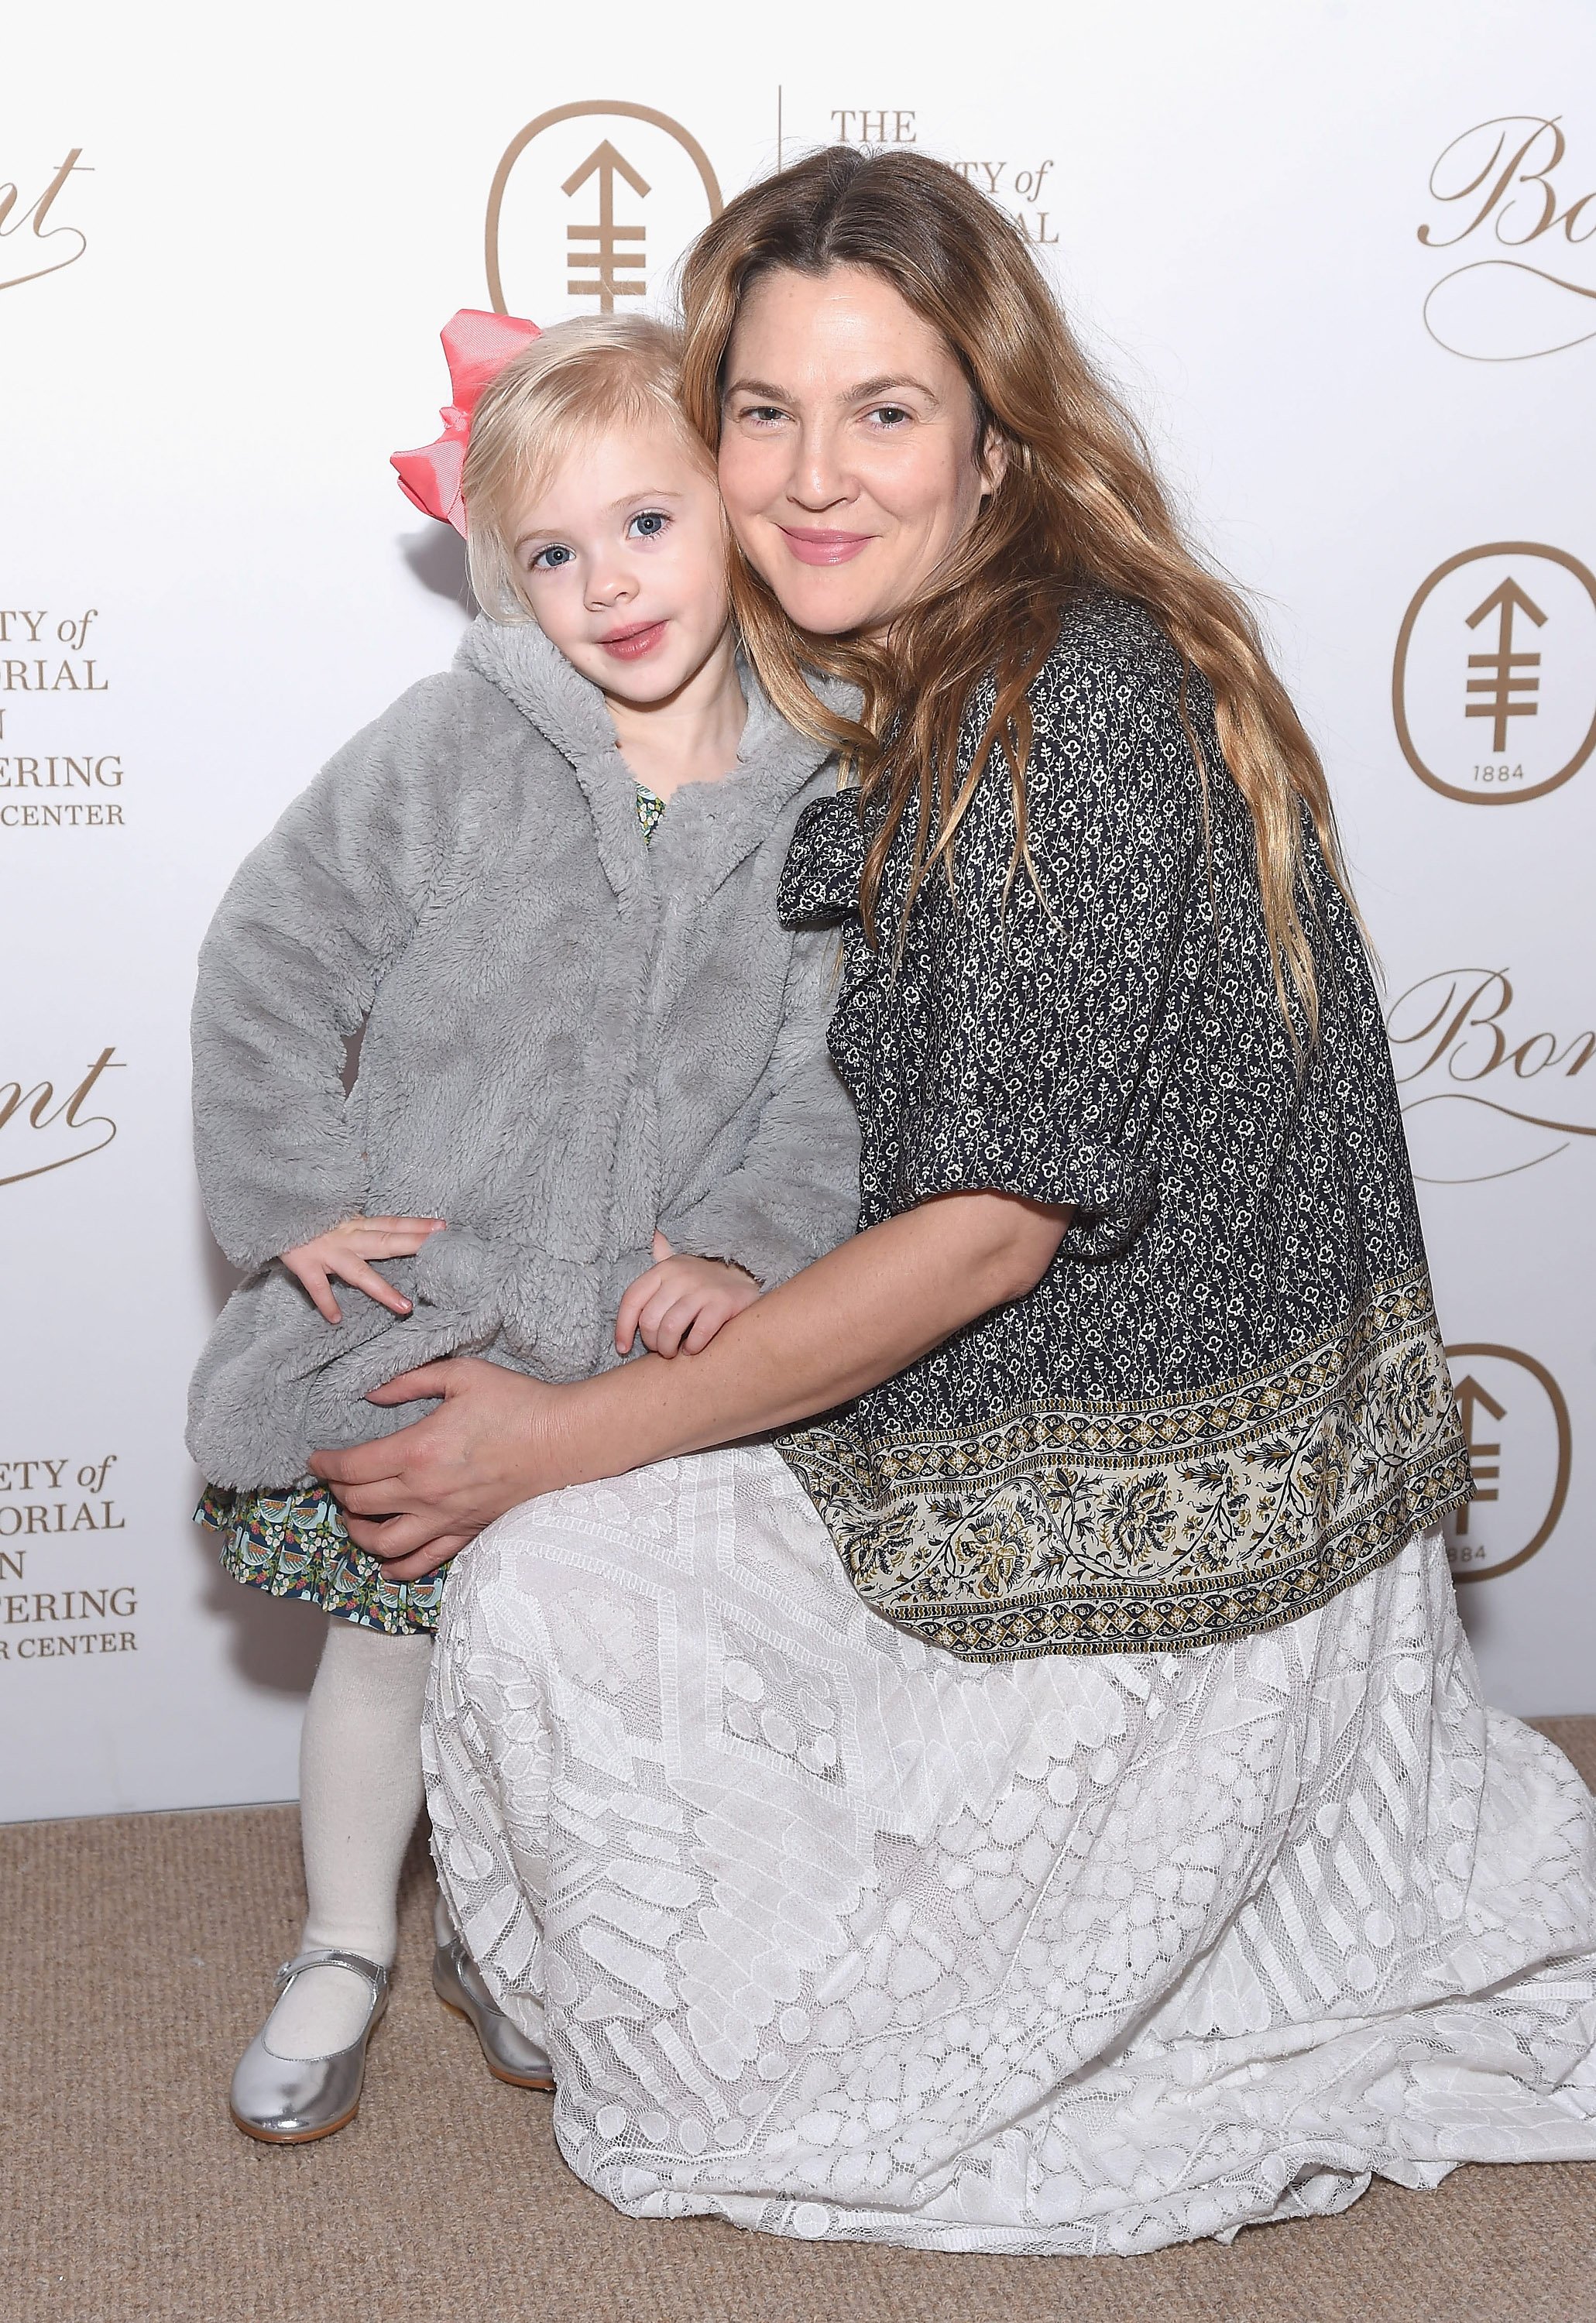 Drew Barrymore and daughter Frankie Barrymore Kopelman attend the 2017 Society Of MSK Bunny Hop at 583 Park Avenue on March 7, 2017 in New York City | Source: Getty Images